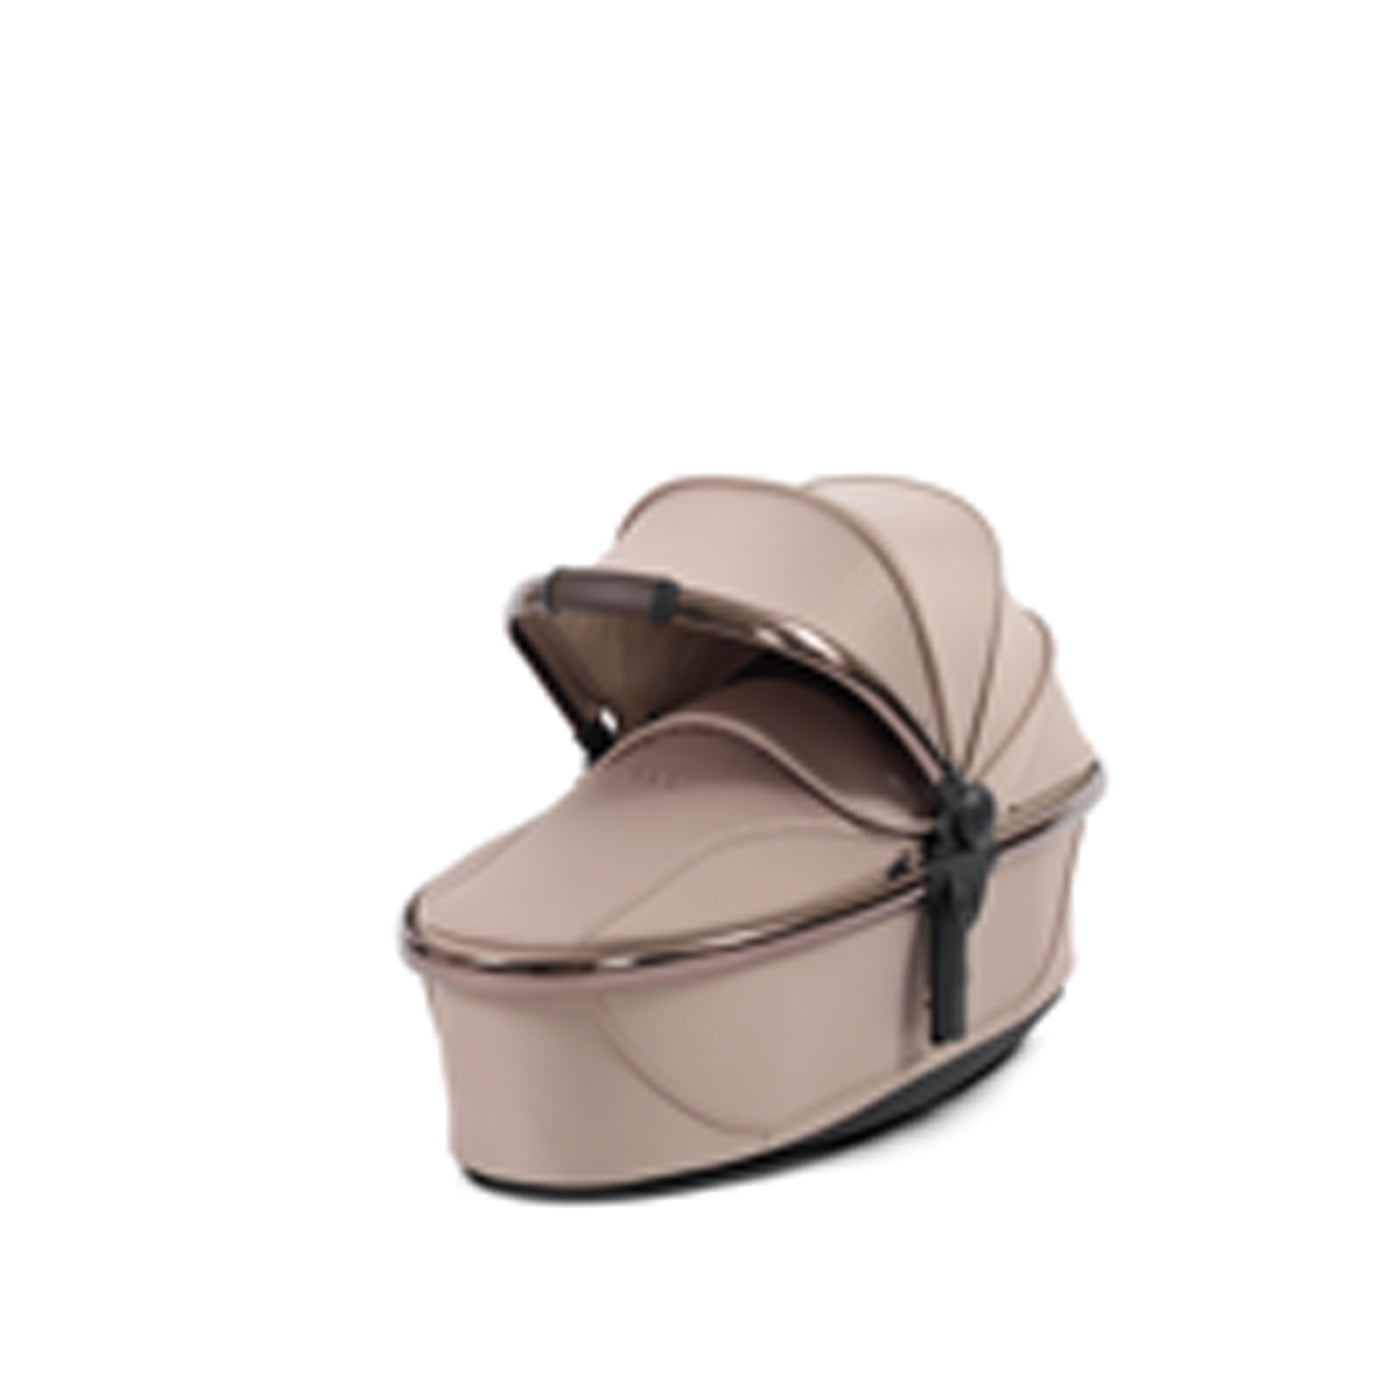 egg3 Carrycot  - Special Edition Houndstooth Almond